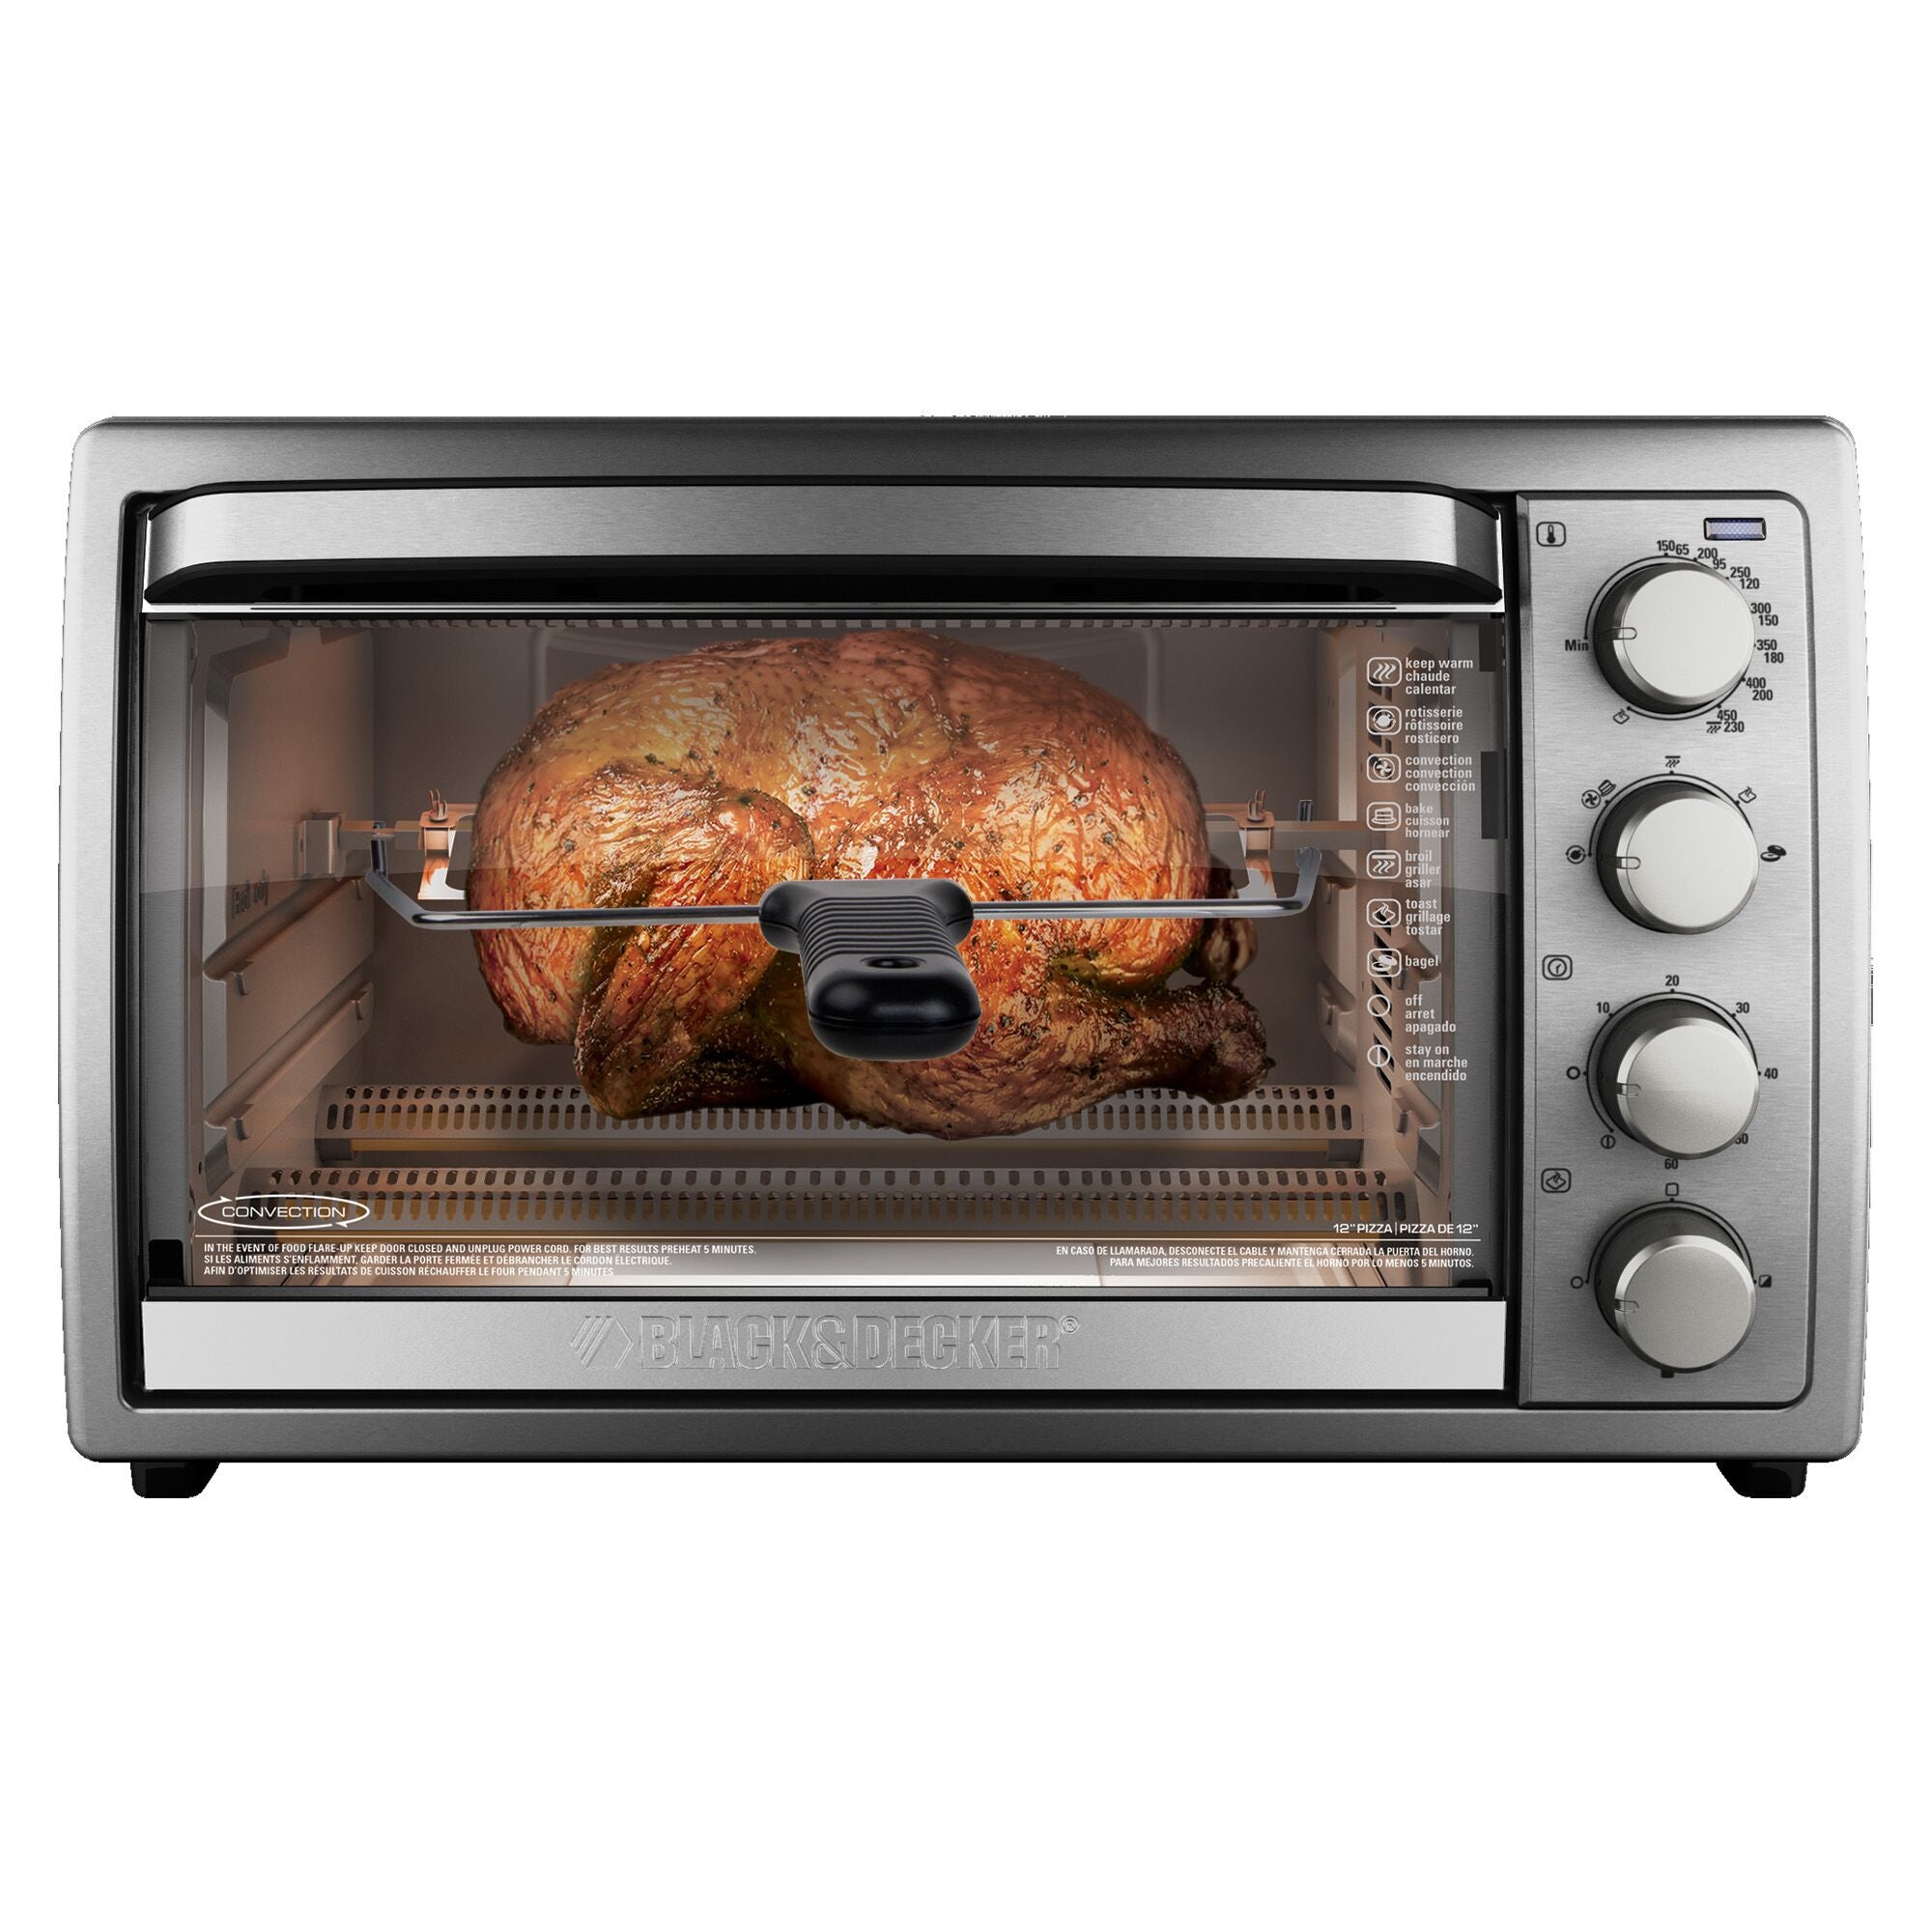 BLACK+DECKER 6-Slice Stainless Steel Convection Toaster Oven